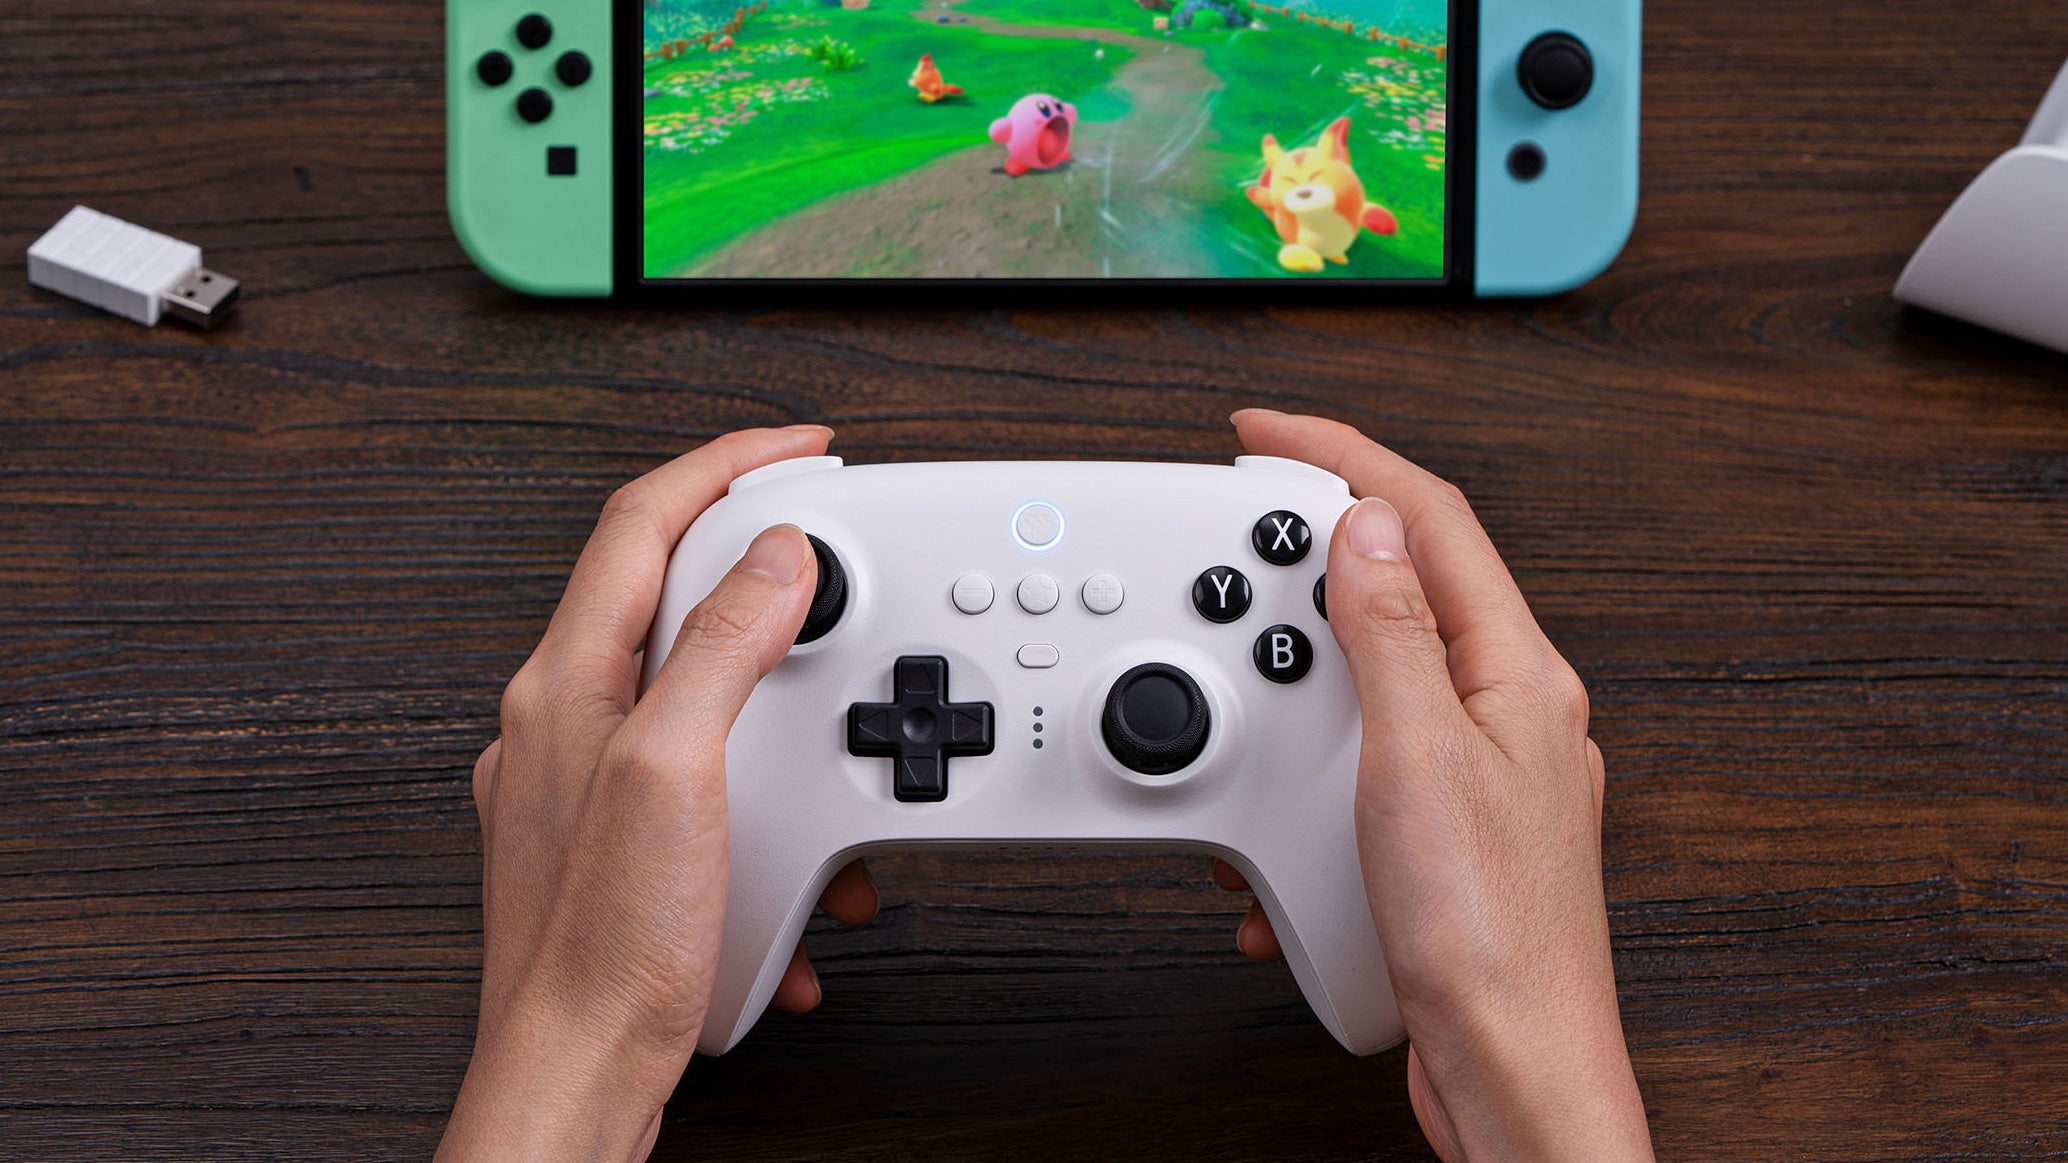 8BitDo’s Xbox-Style Ultimate Controller Goes Wireless, But Not For the Xbox